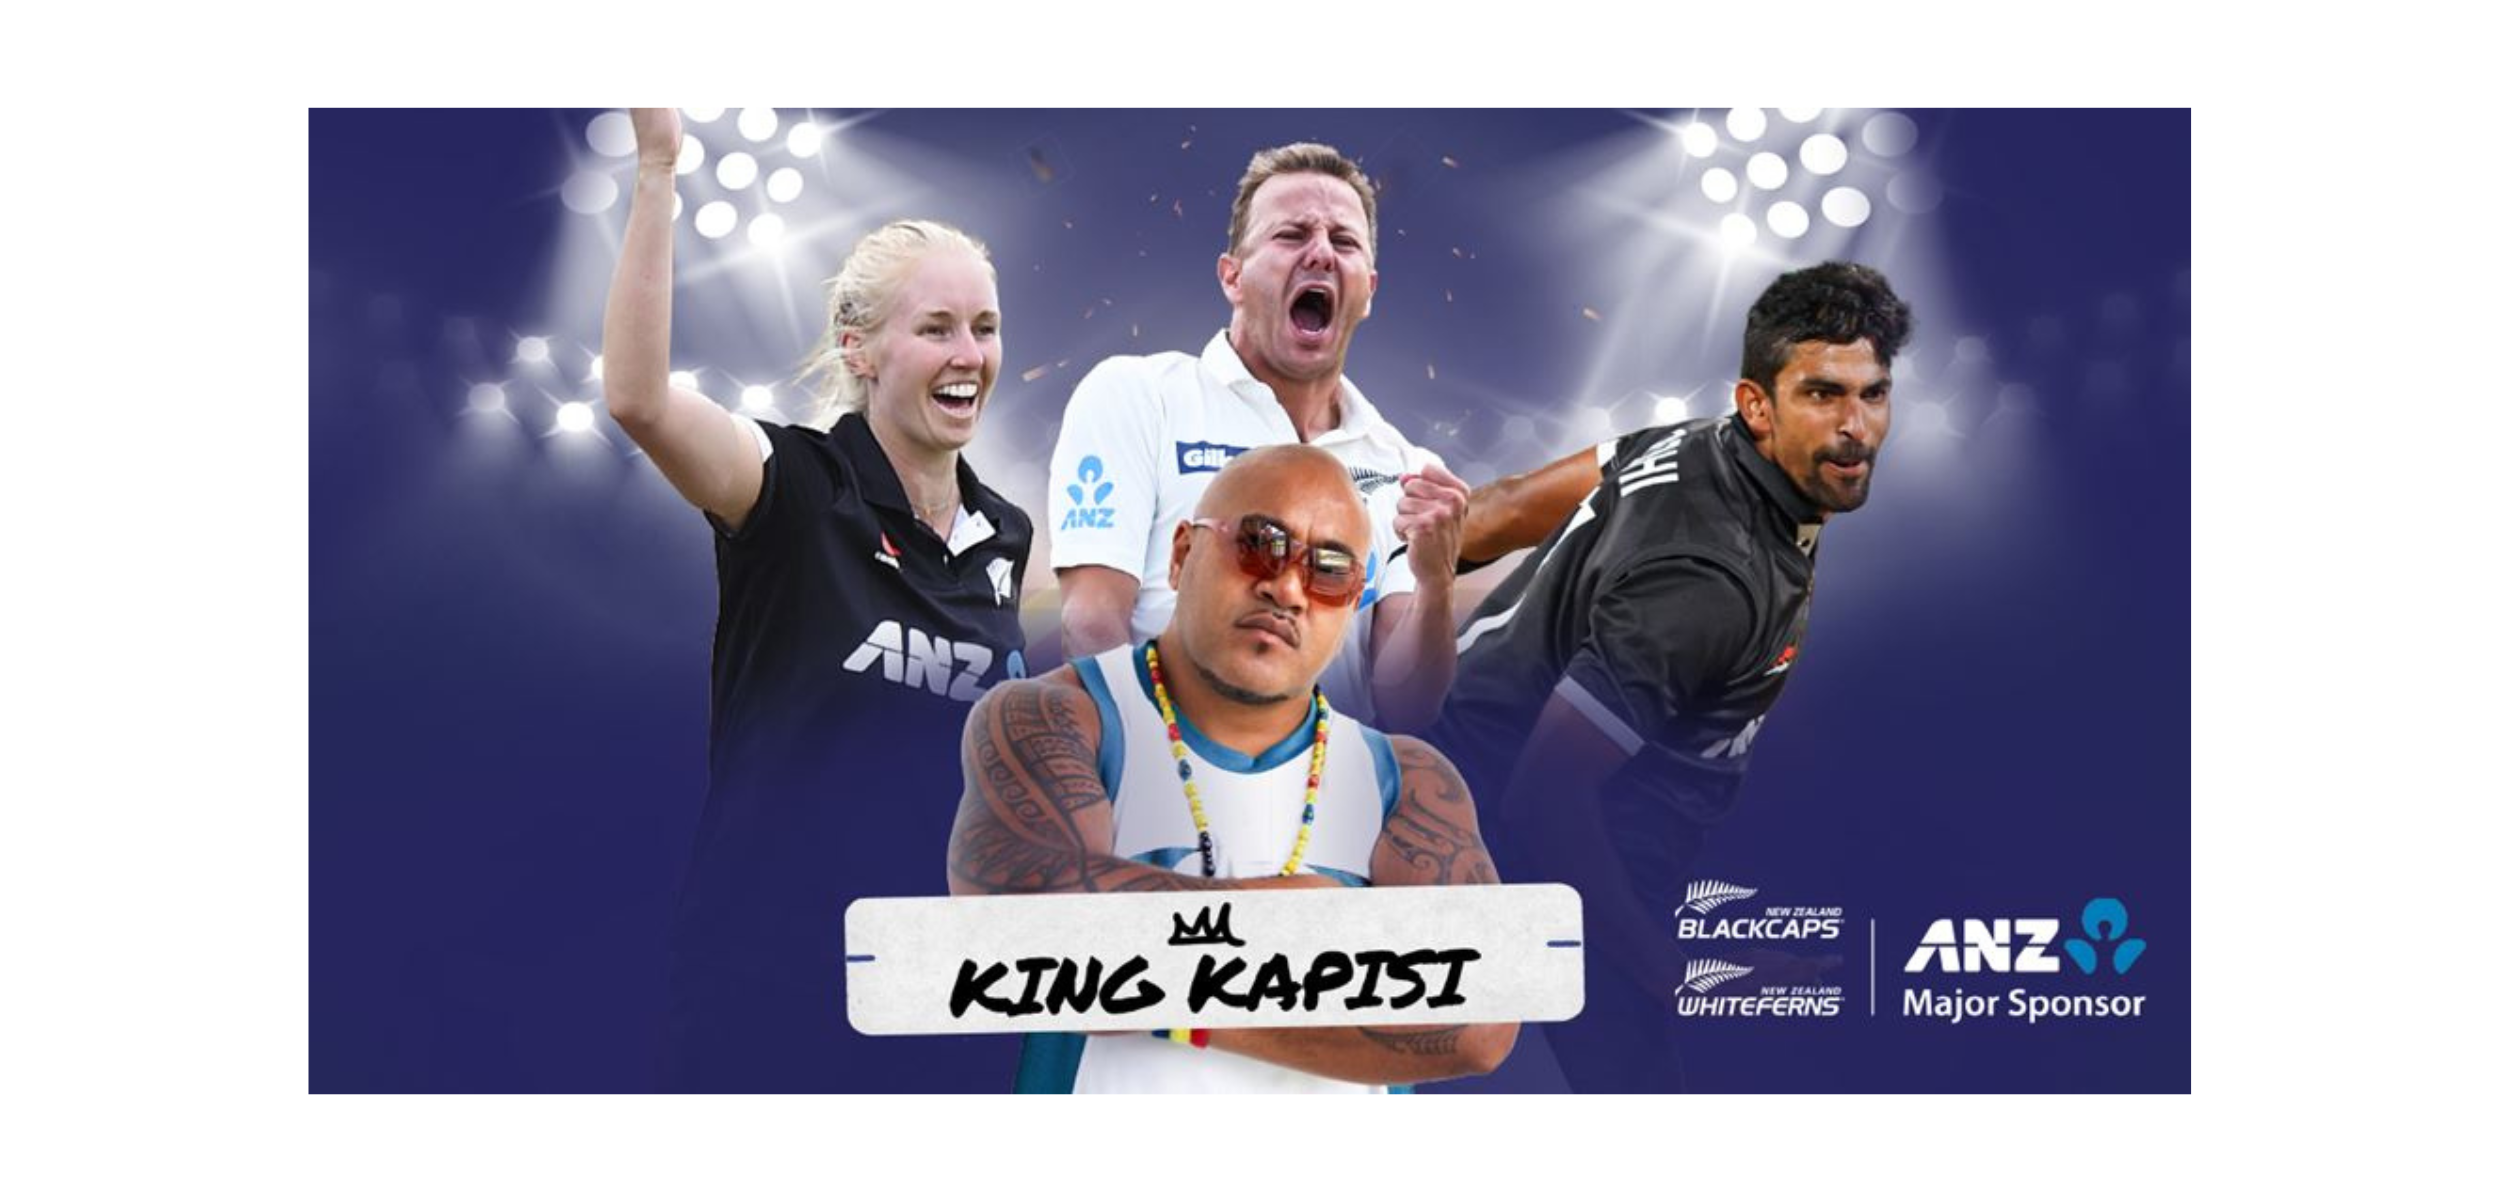 NZC: King Kapisi to unite fans with a summer cricket anthem